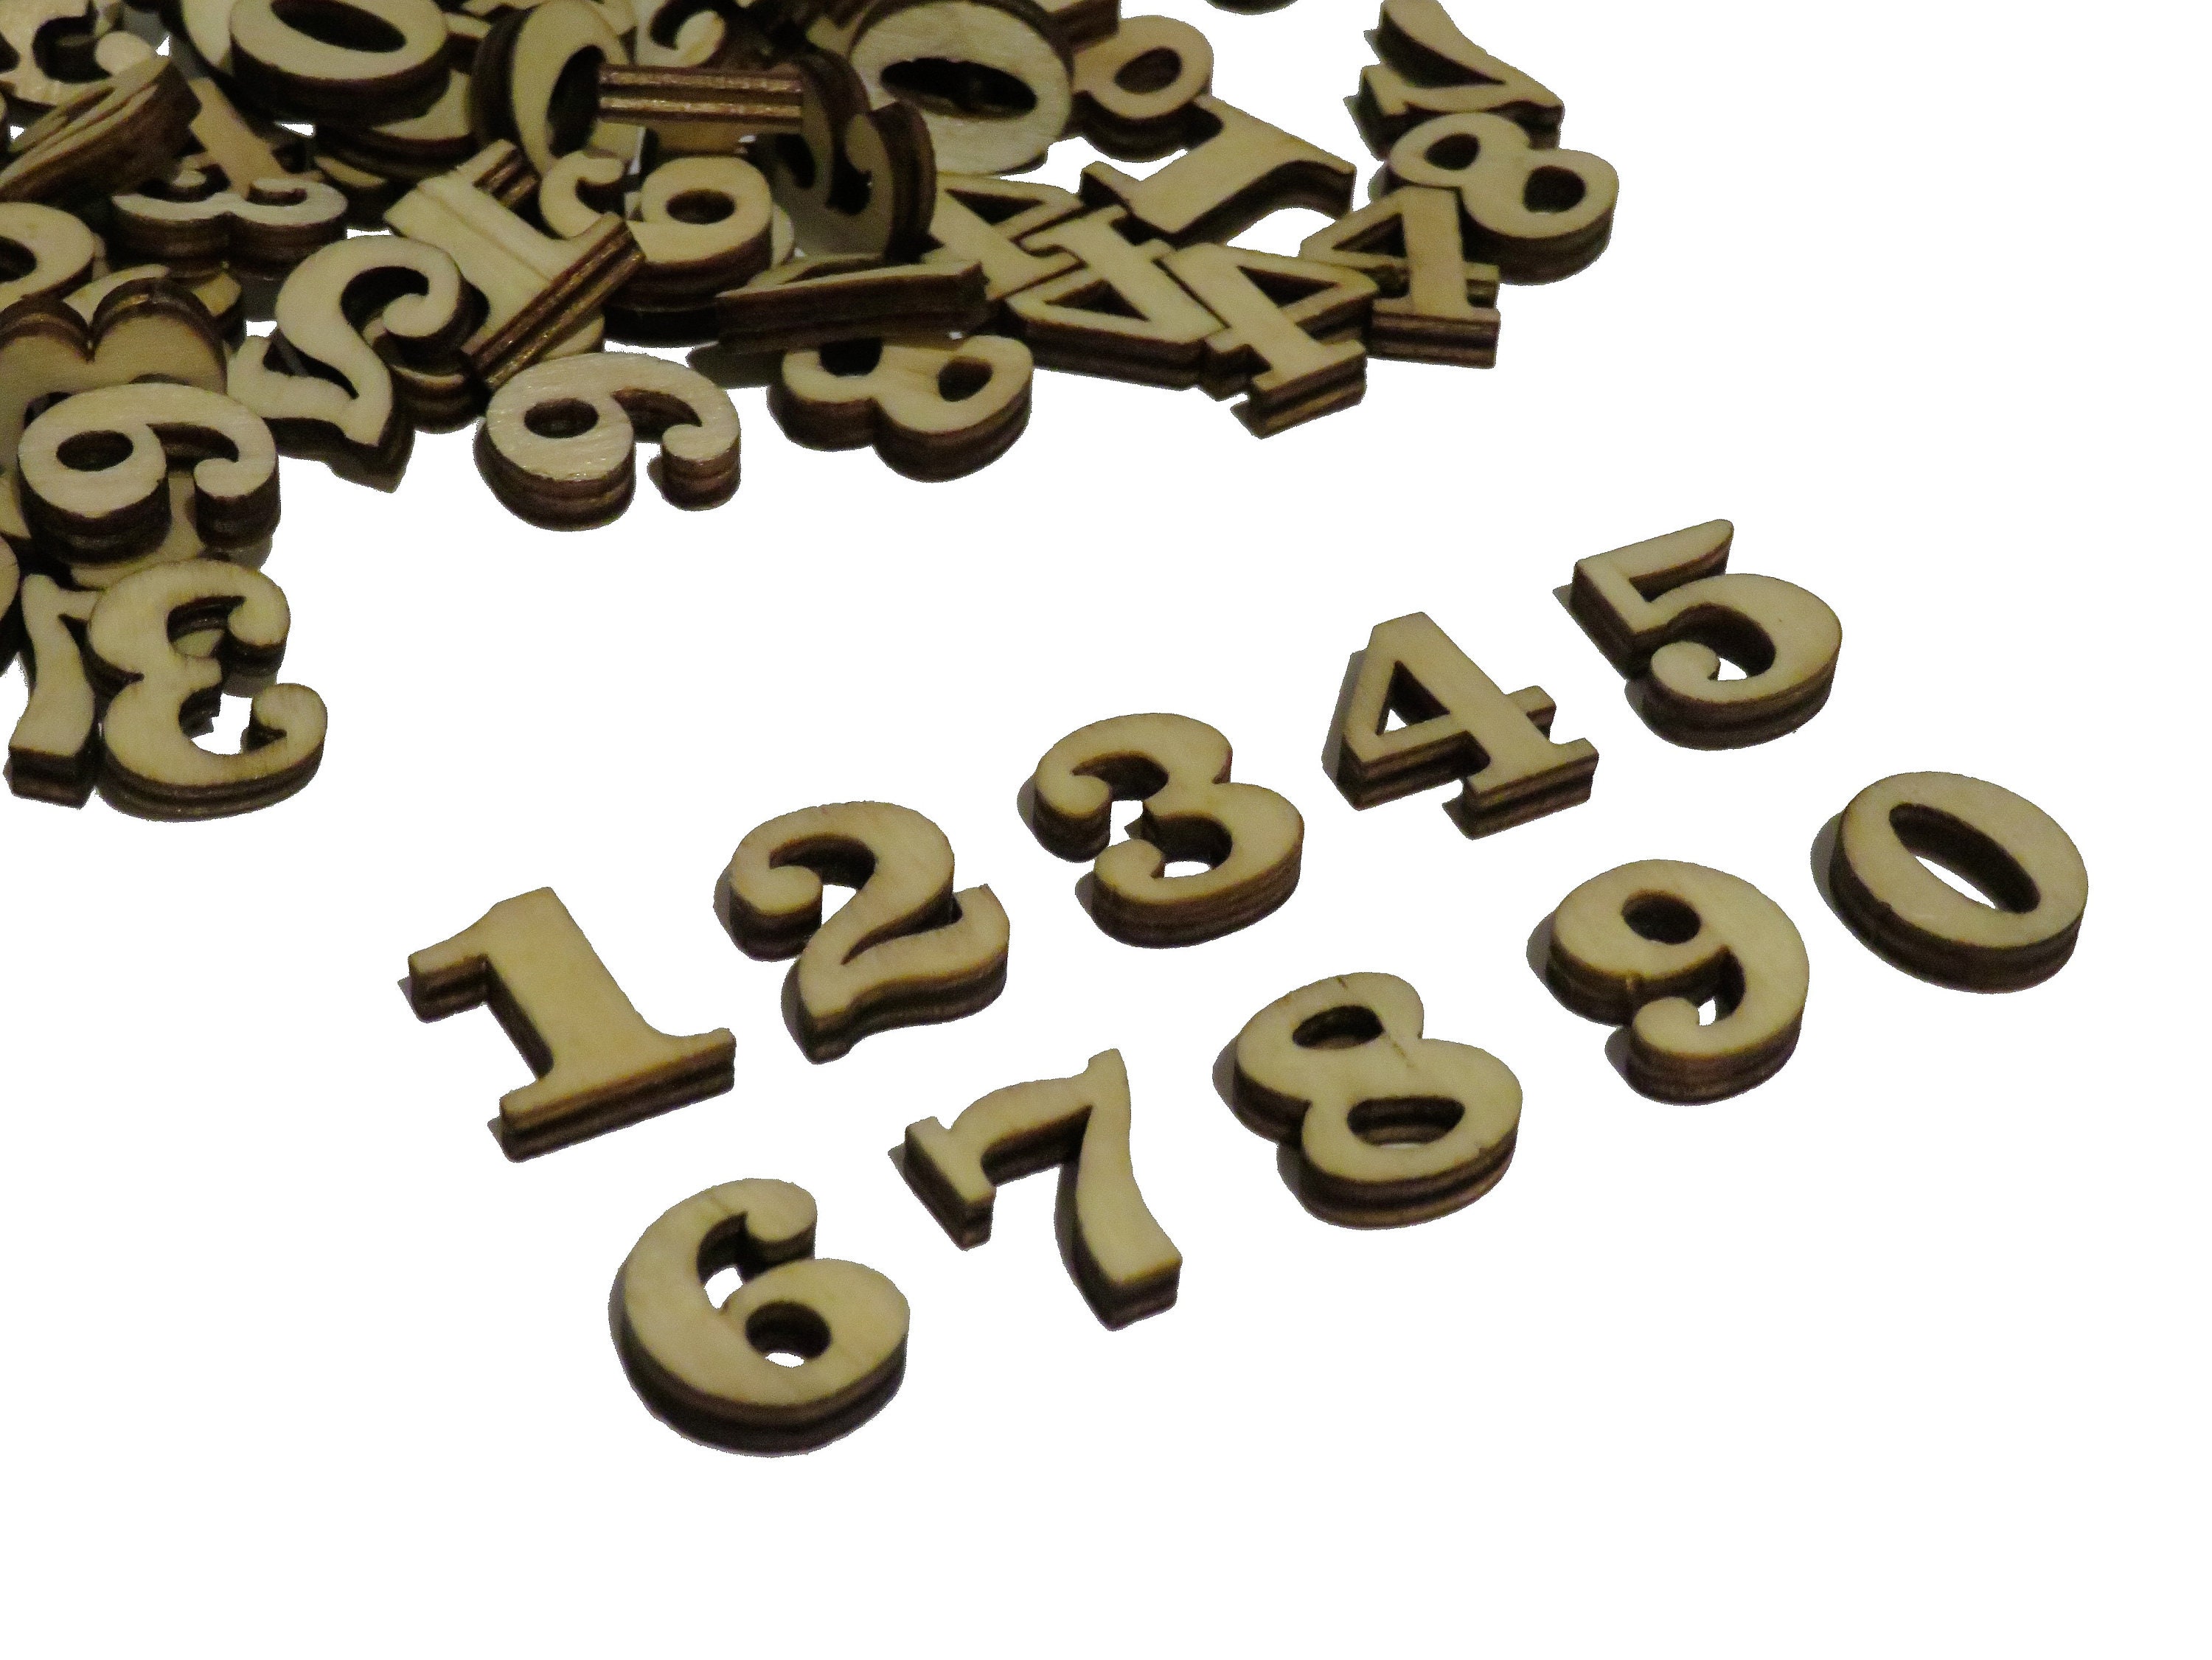 Wood Numbers Images – Browse 211,318 Stock Photos, Vectors, and